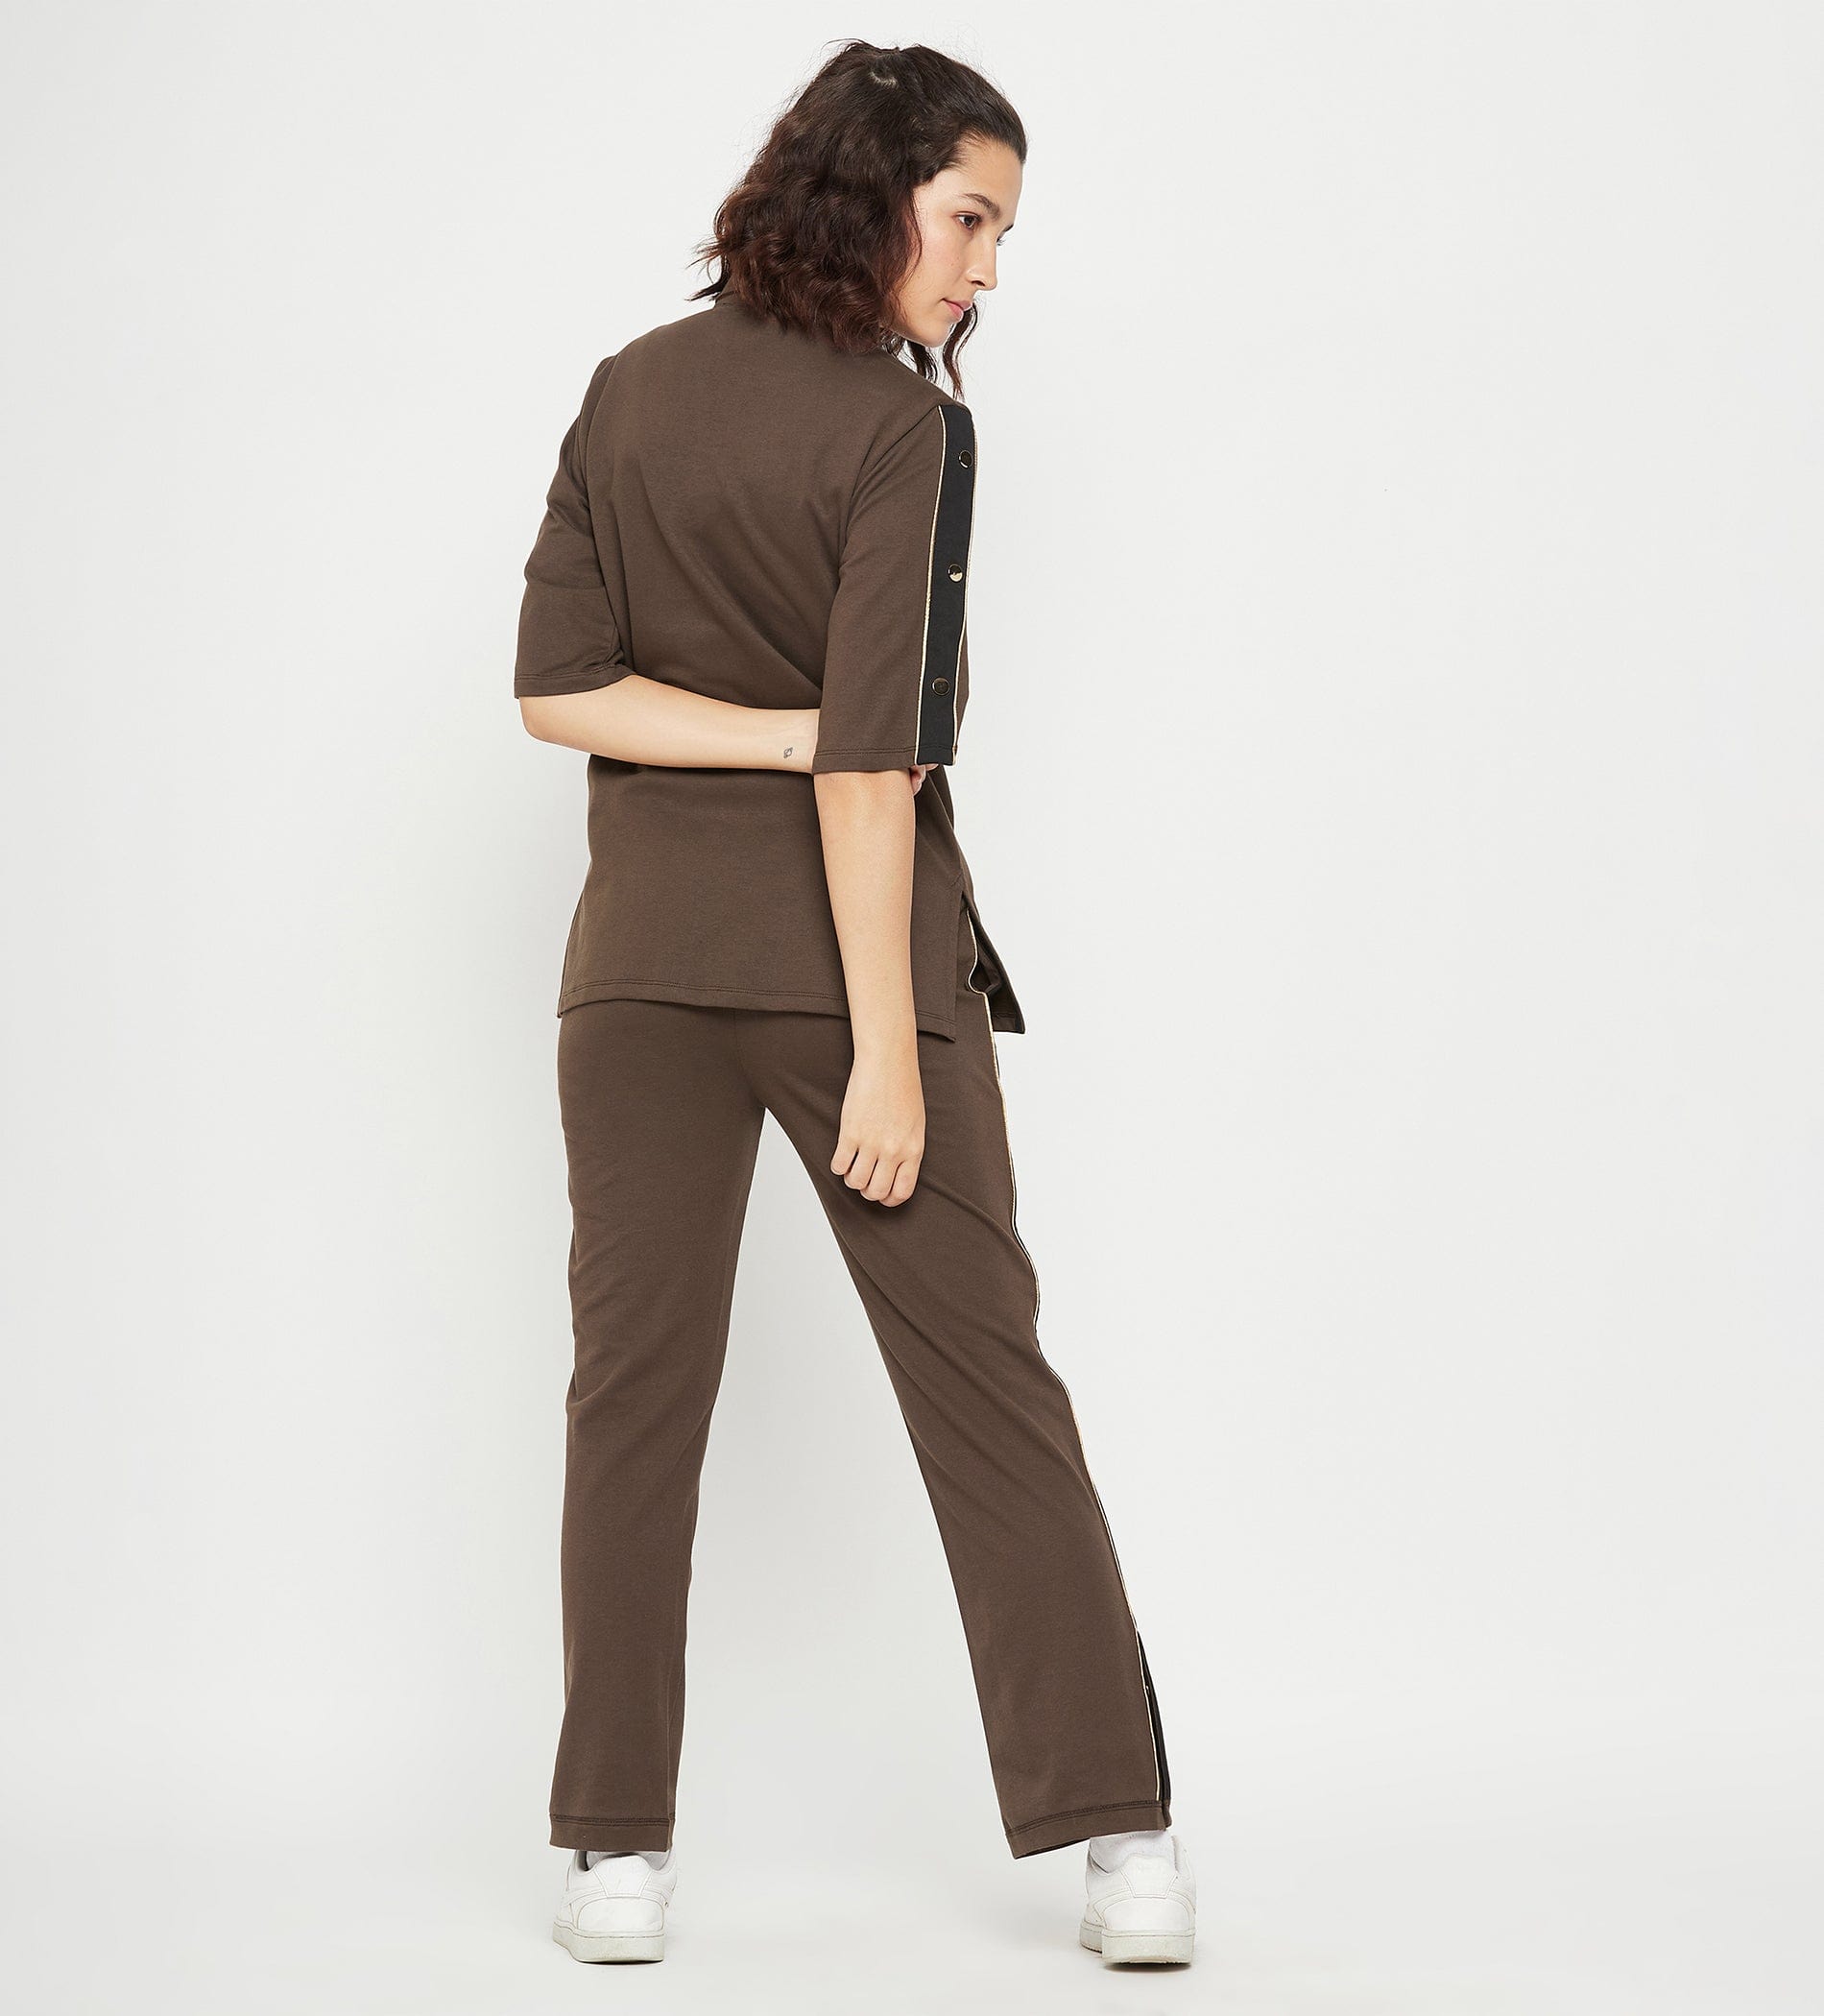 Co-ords Co-Ords Brown Front Open Co-Ord Set for Women